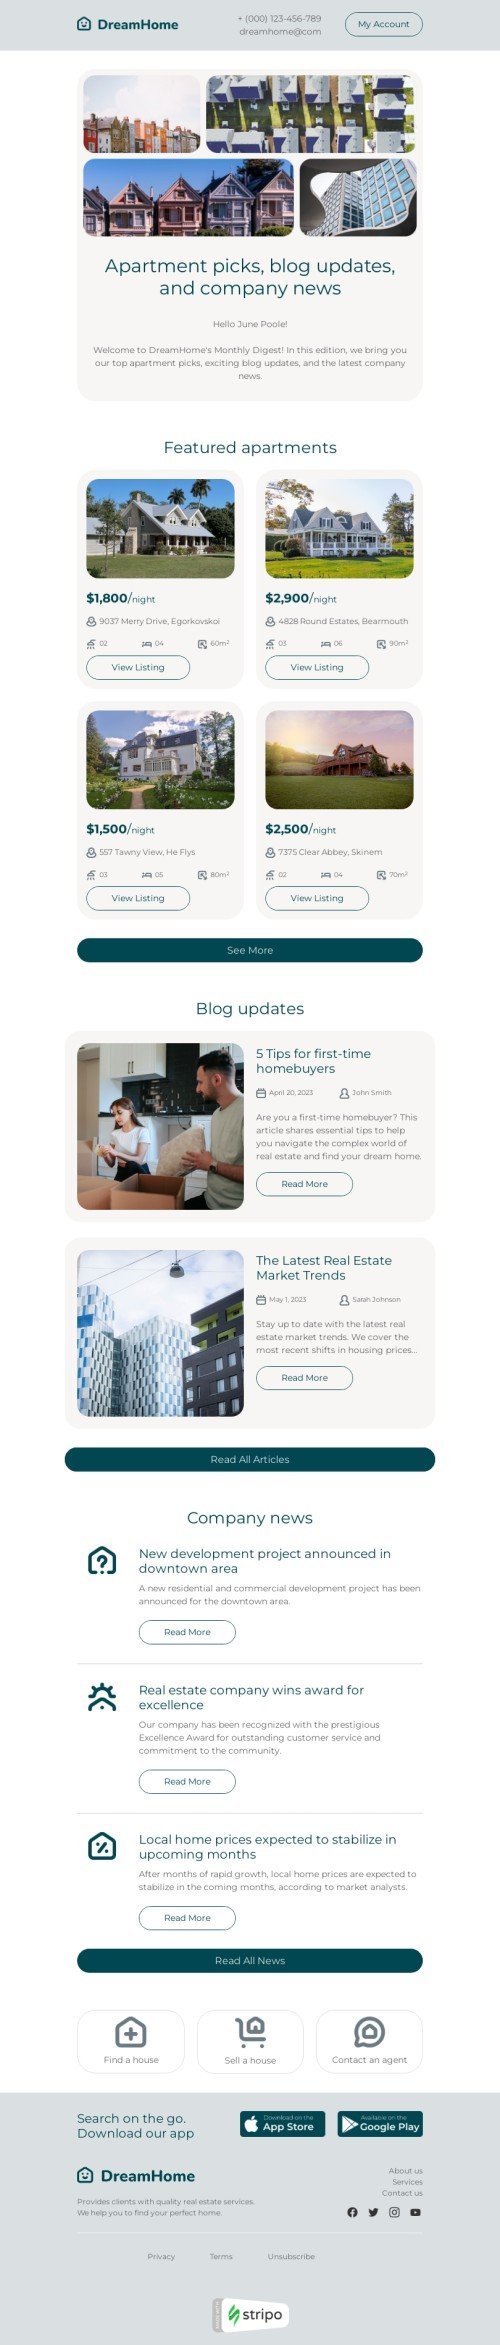 Newsletters email template "Newsletter" for real estate industry mobile view